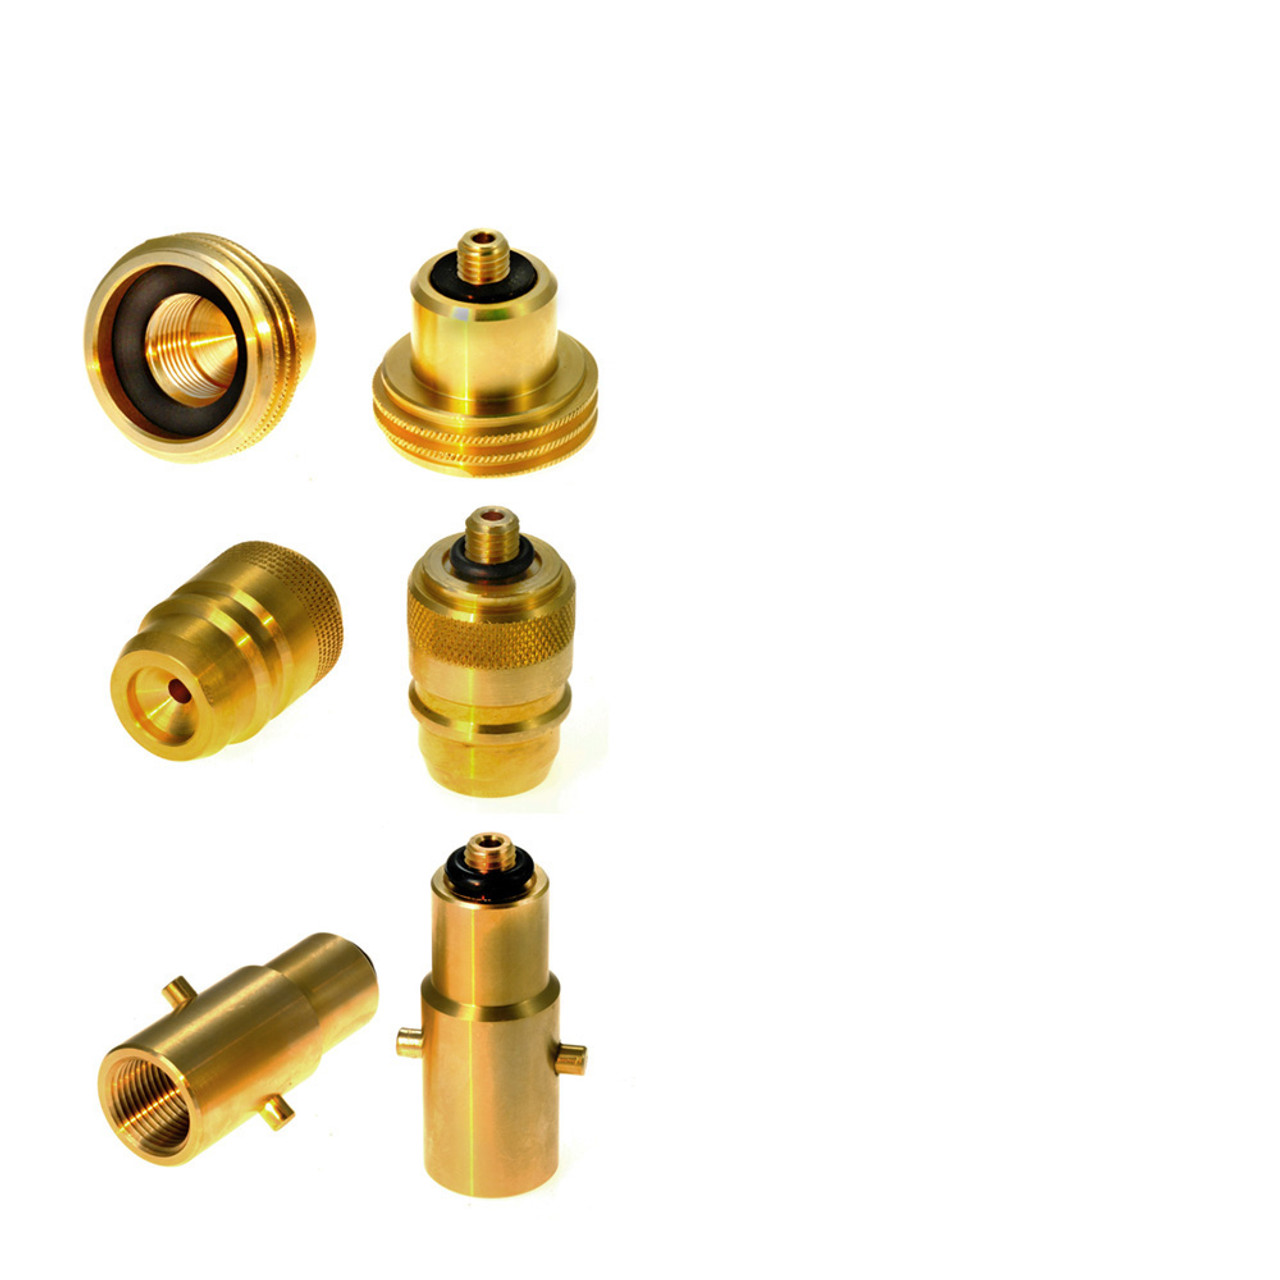 https://cdn11.bigcommerce.com/s-0baae/images/stencil/1280x1280/products/905/4219/Autogas_LPG_Adaptors_SET_Filling_Point_Adapters_for_Europe_Italy_Germnany_France_Spain__58977.1449230447.jpg?c=2?imbypass=on